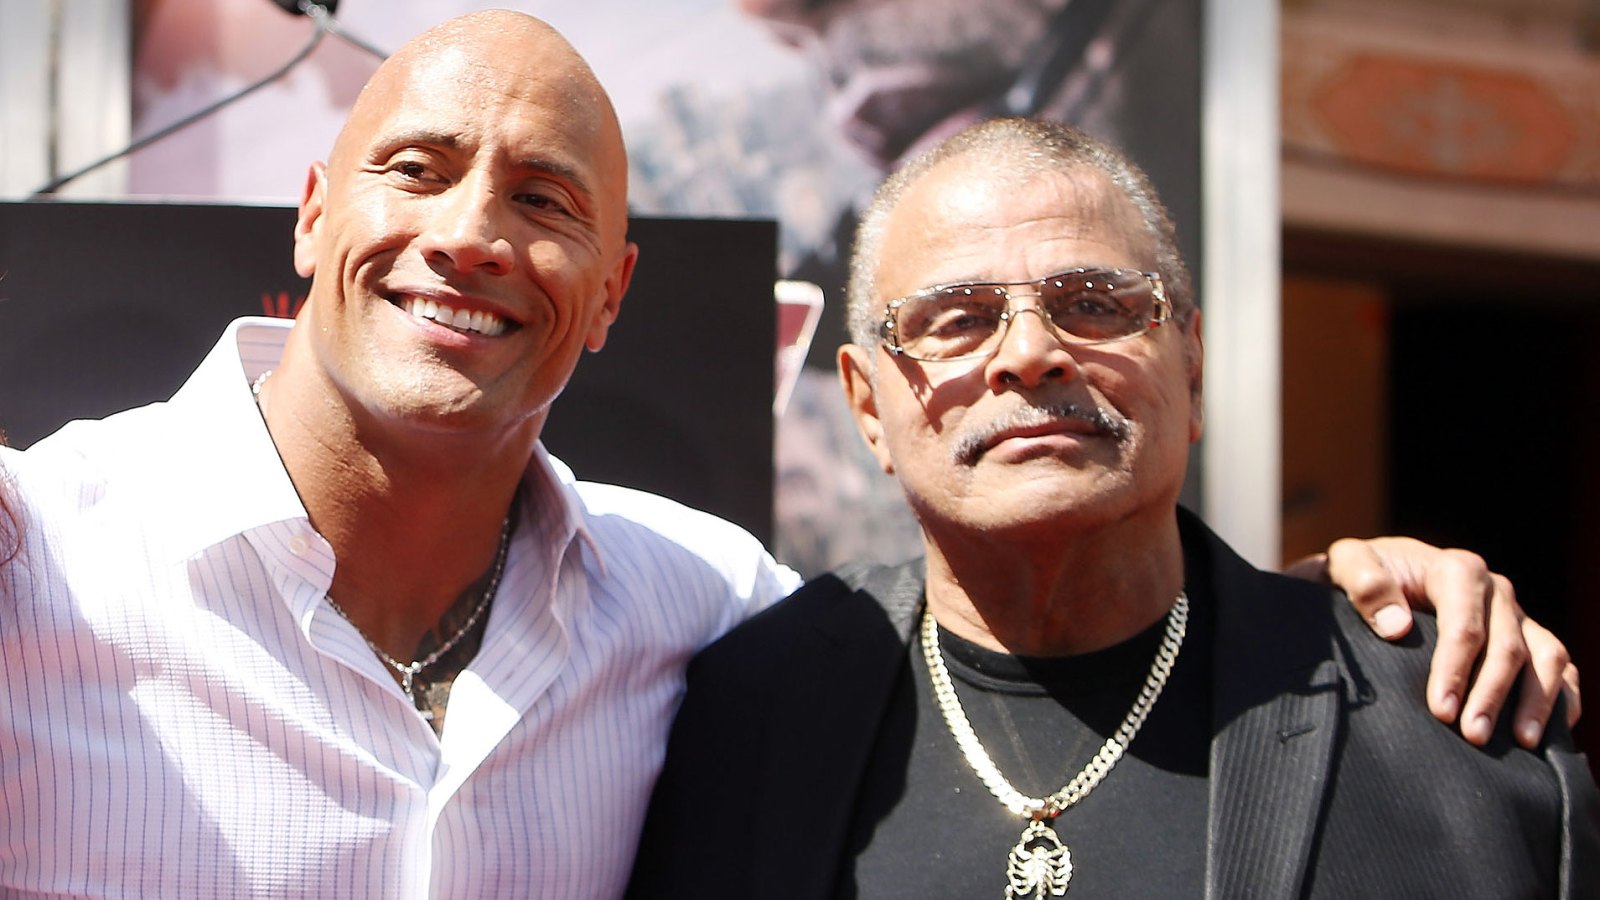 Dwayne 'The Rock' Johnson Is Buying His Dad a New House